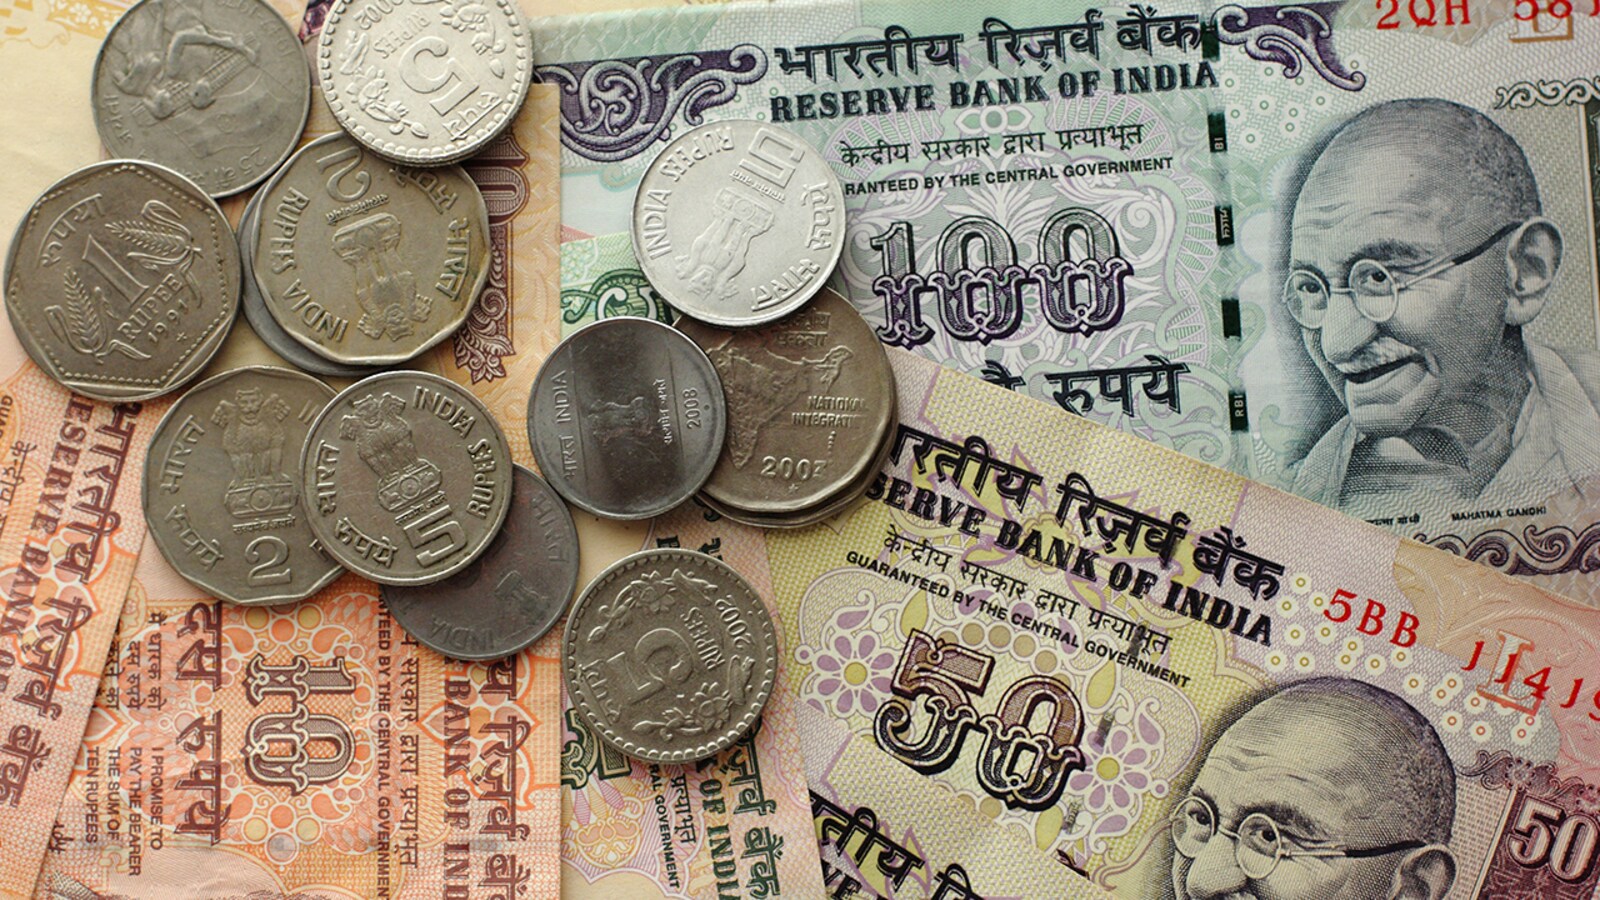 Can India implement Universal Basic Income?